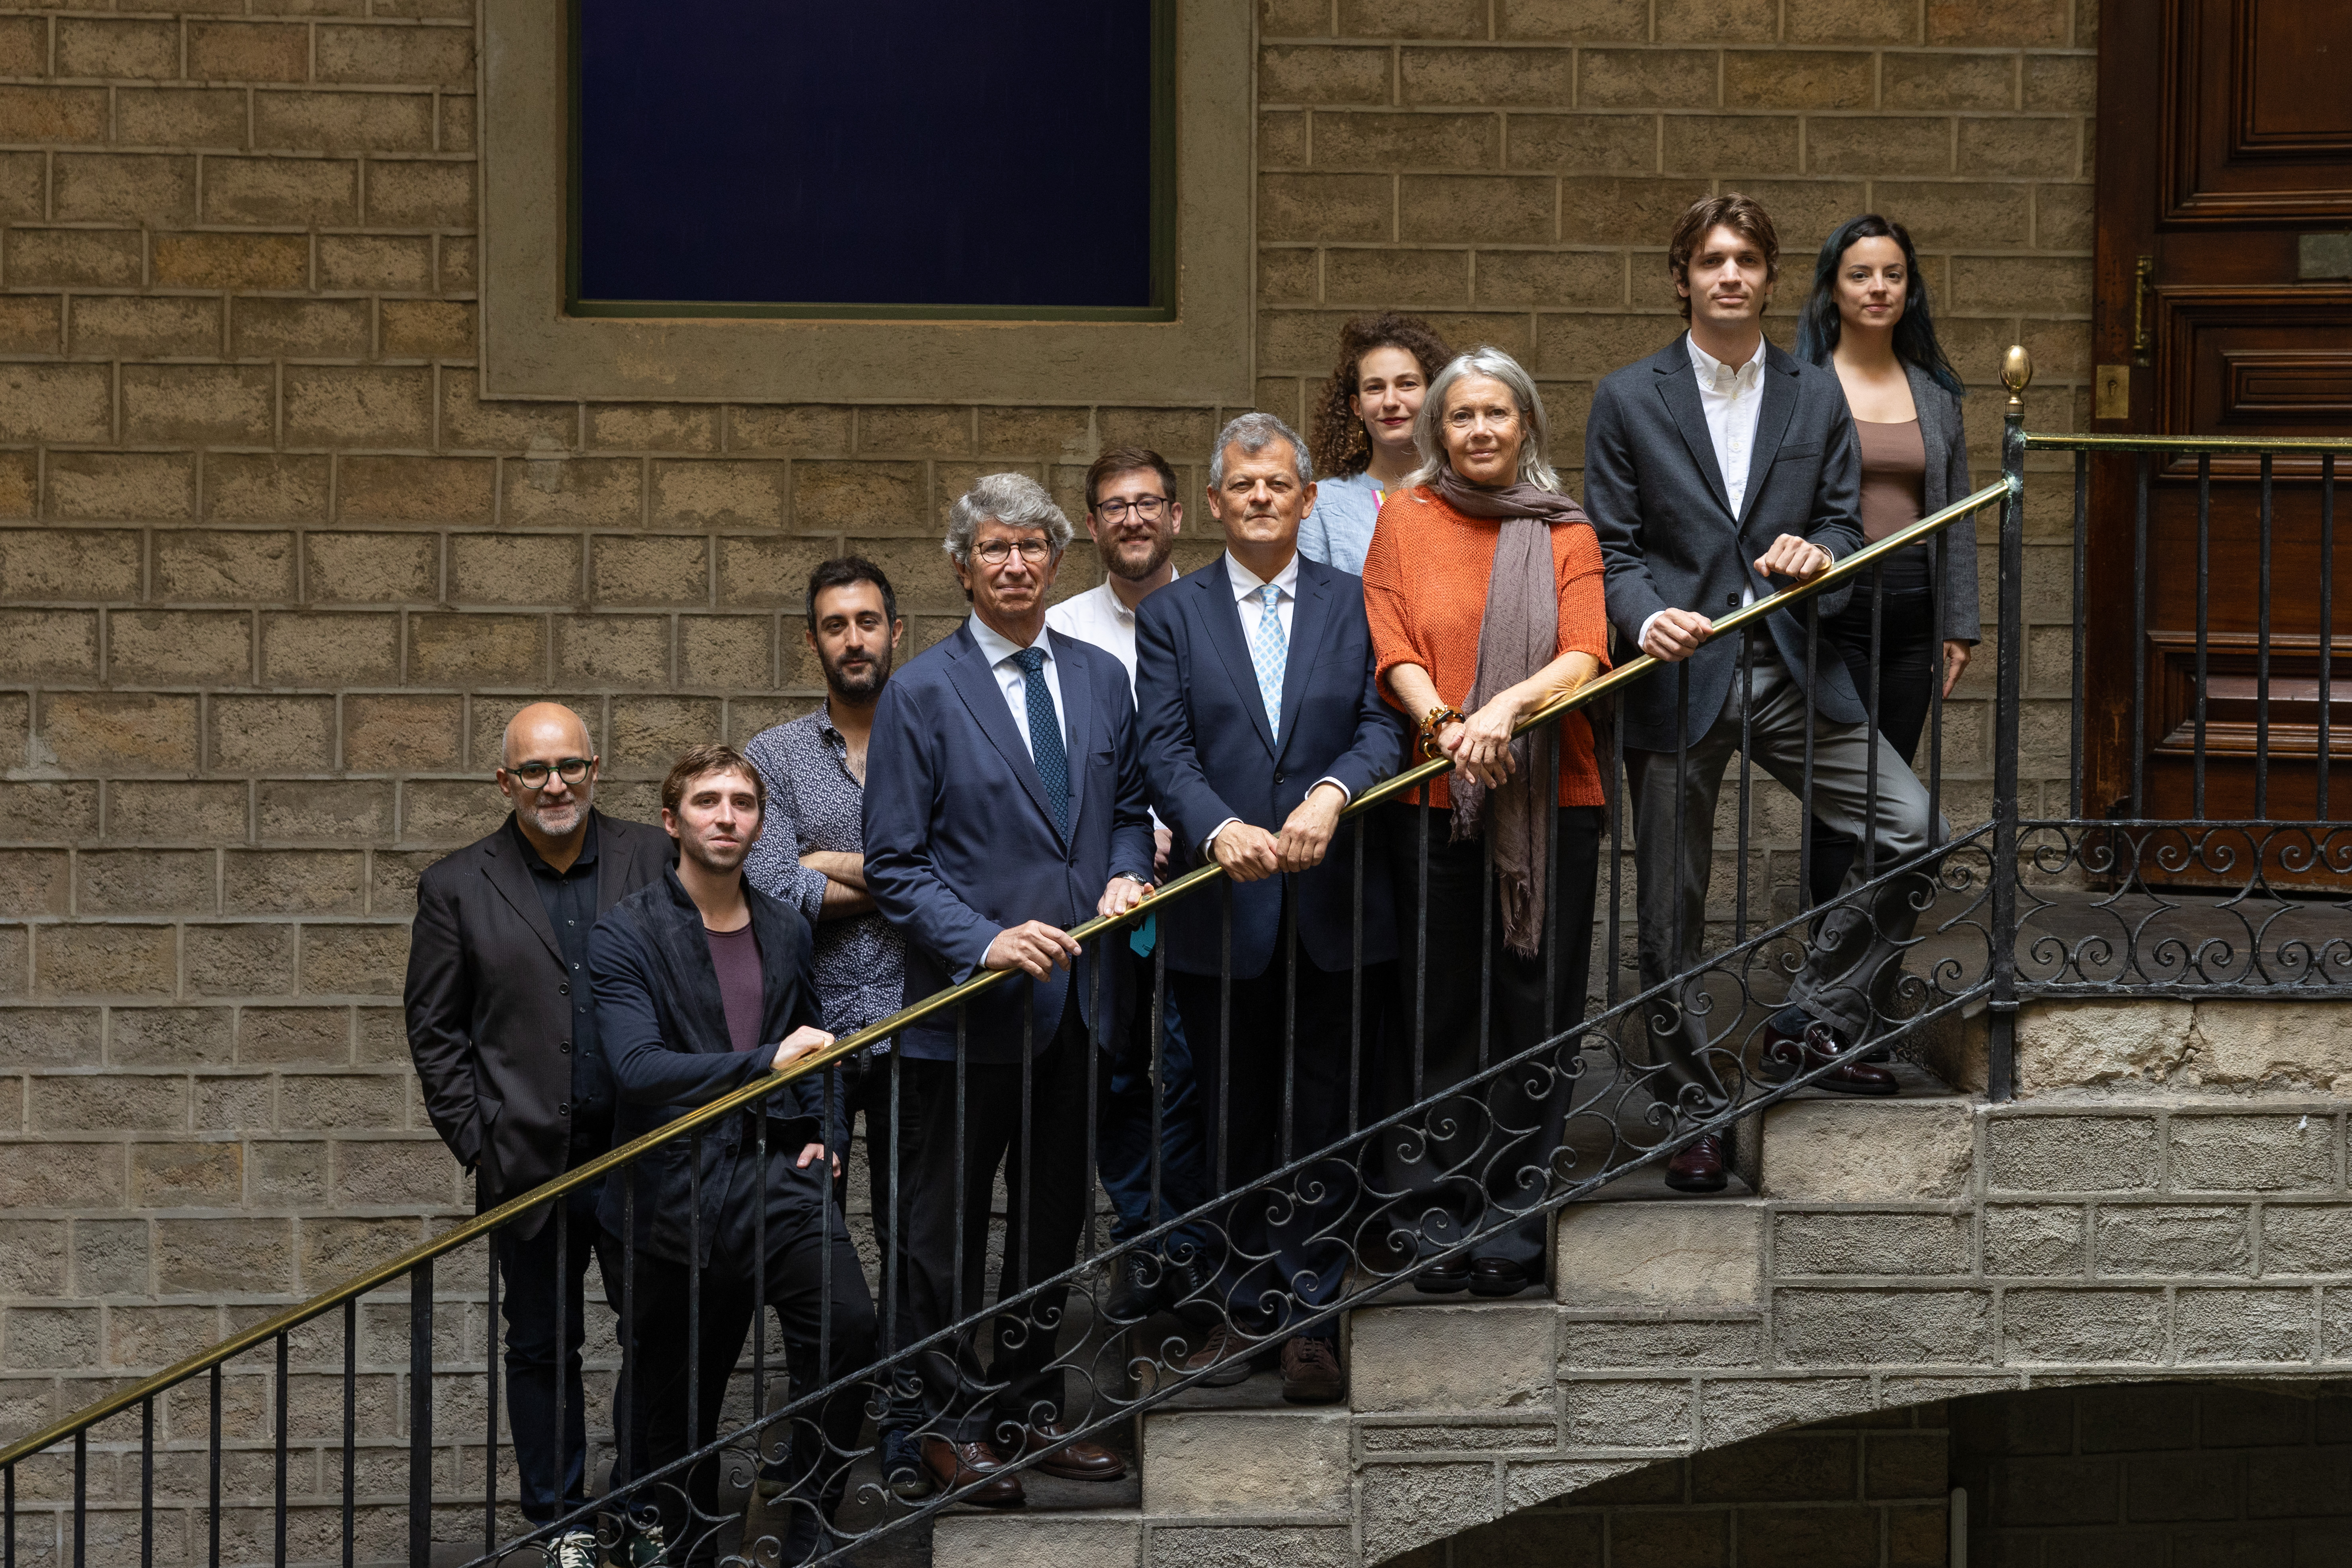 The artistic director of the festival and some of the artists presented the line-up at Barcelona